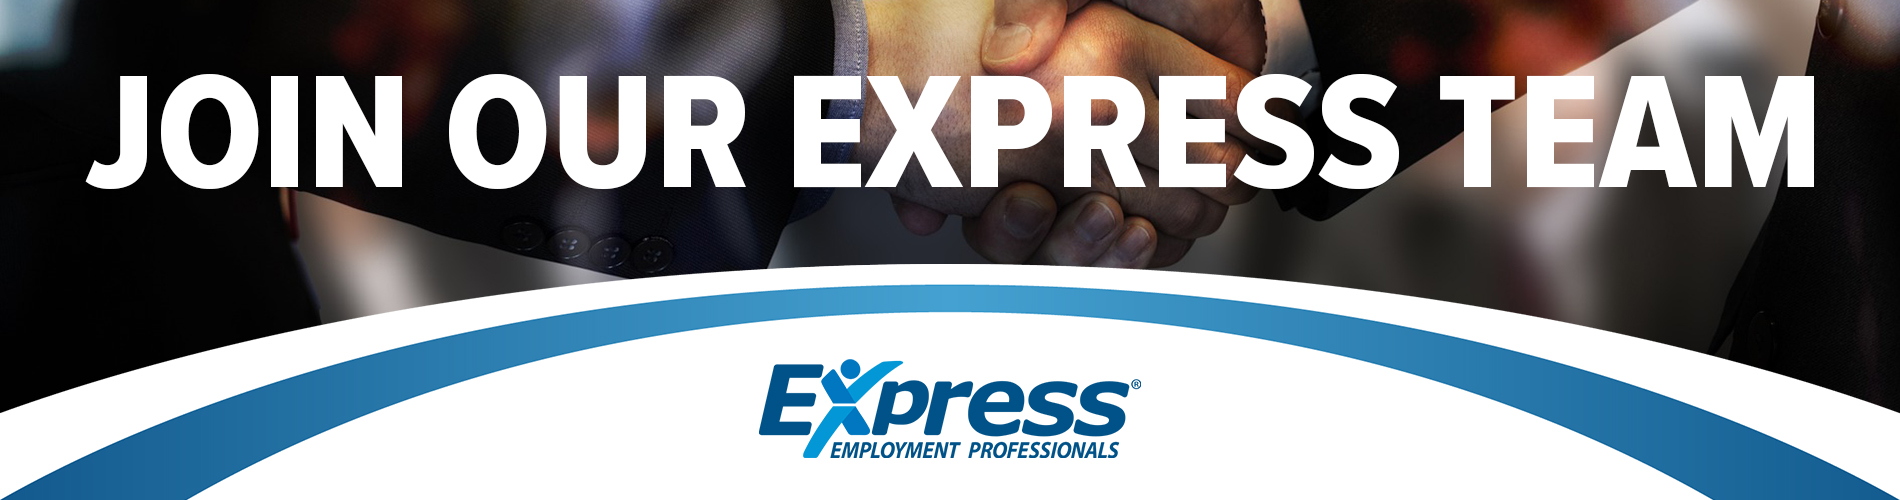 Join Our Express Team, Staffing Industry Jobs in Colorado Springs